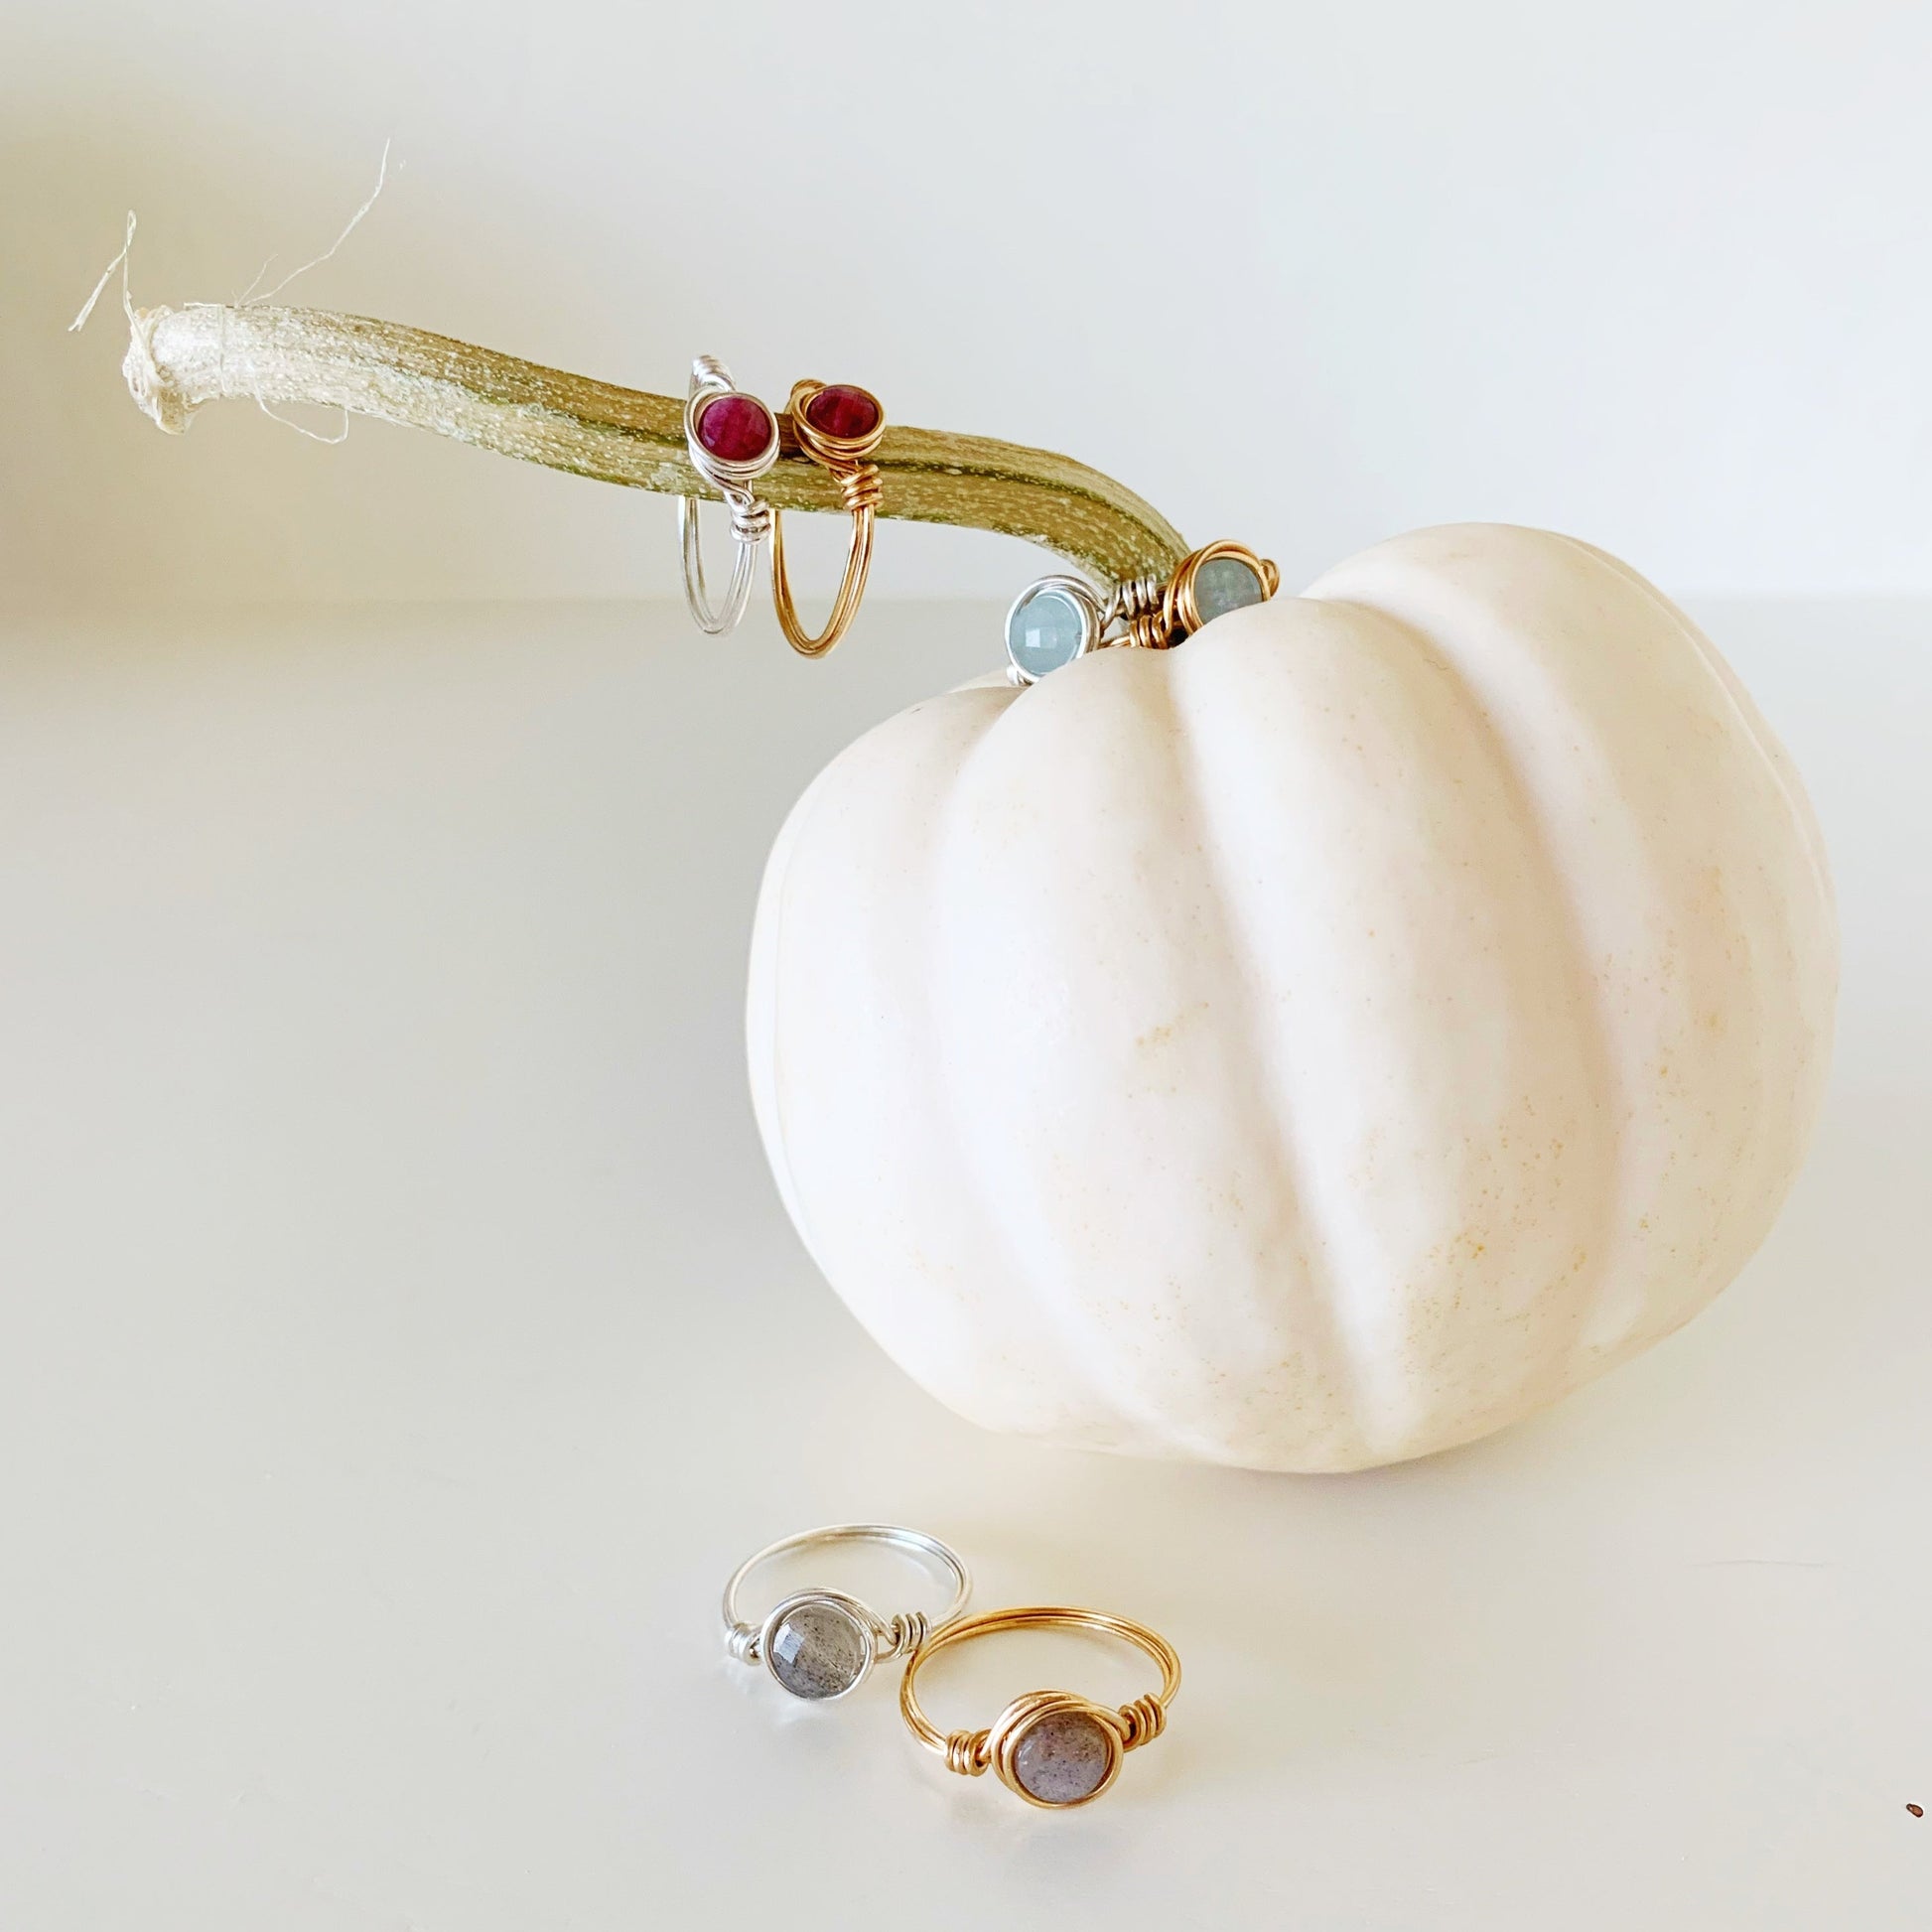 a variety of different mermaids and madeleines wire-wrapped rings are placed on and near a white pumpkin and photographed on a white surface